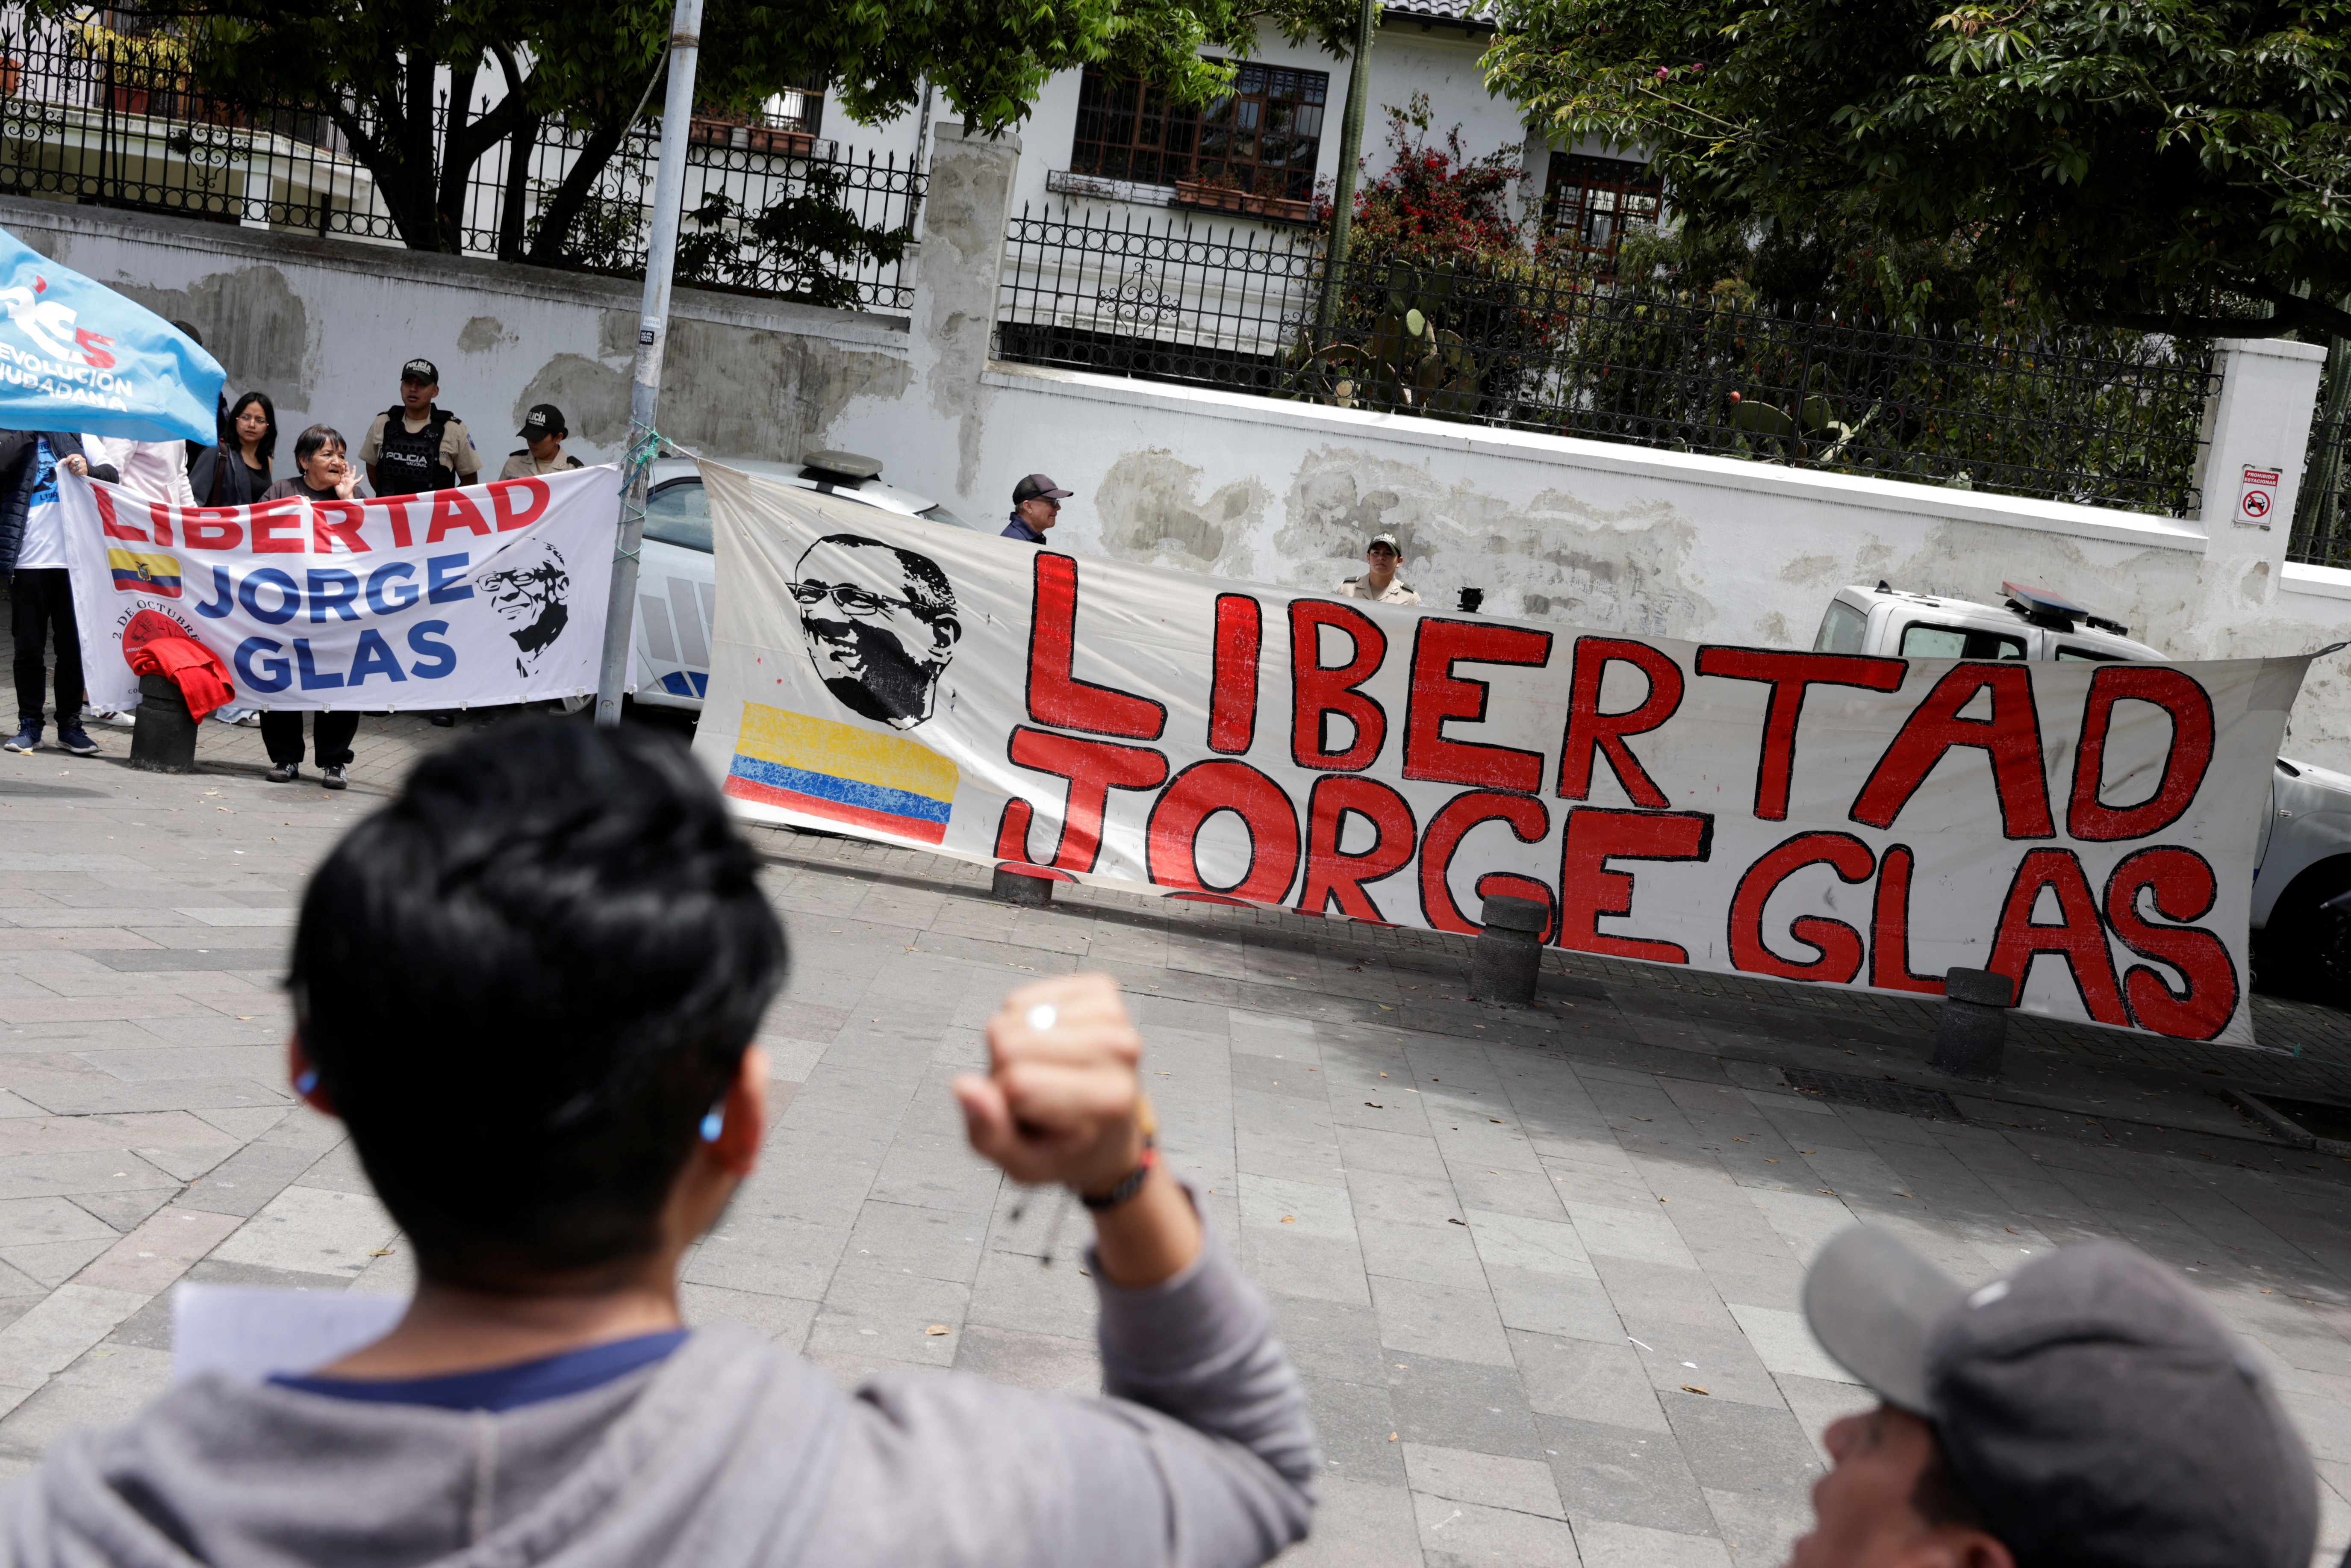 Demonstrators gather outside the Mexican embassy in Ecuador to ask for the freedom of former Ecuador VP Glas, in Quito